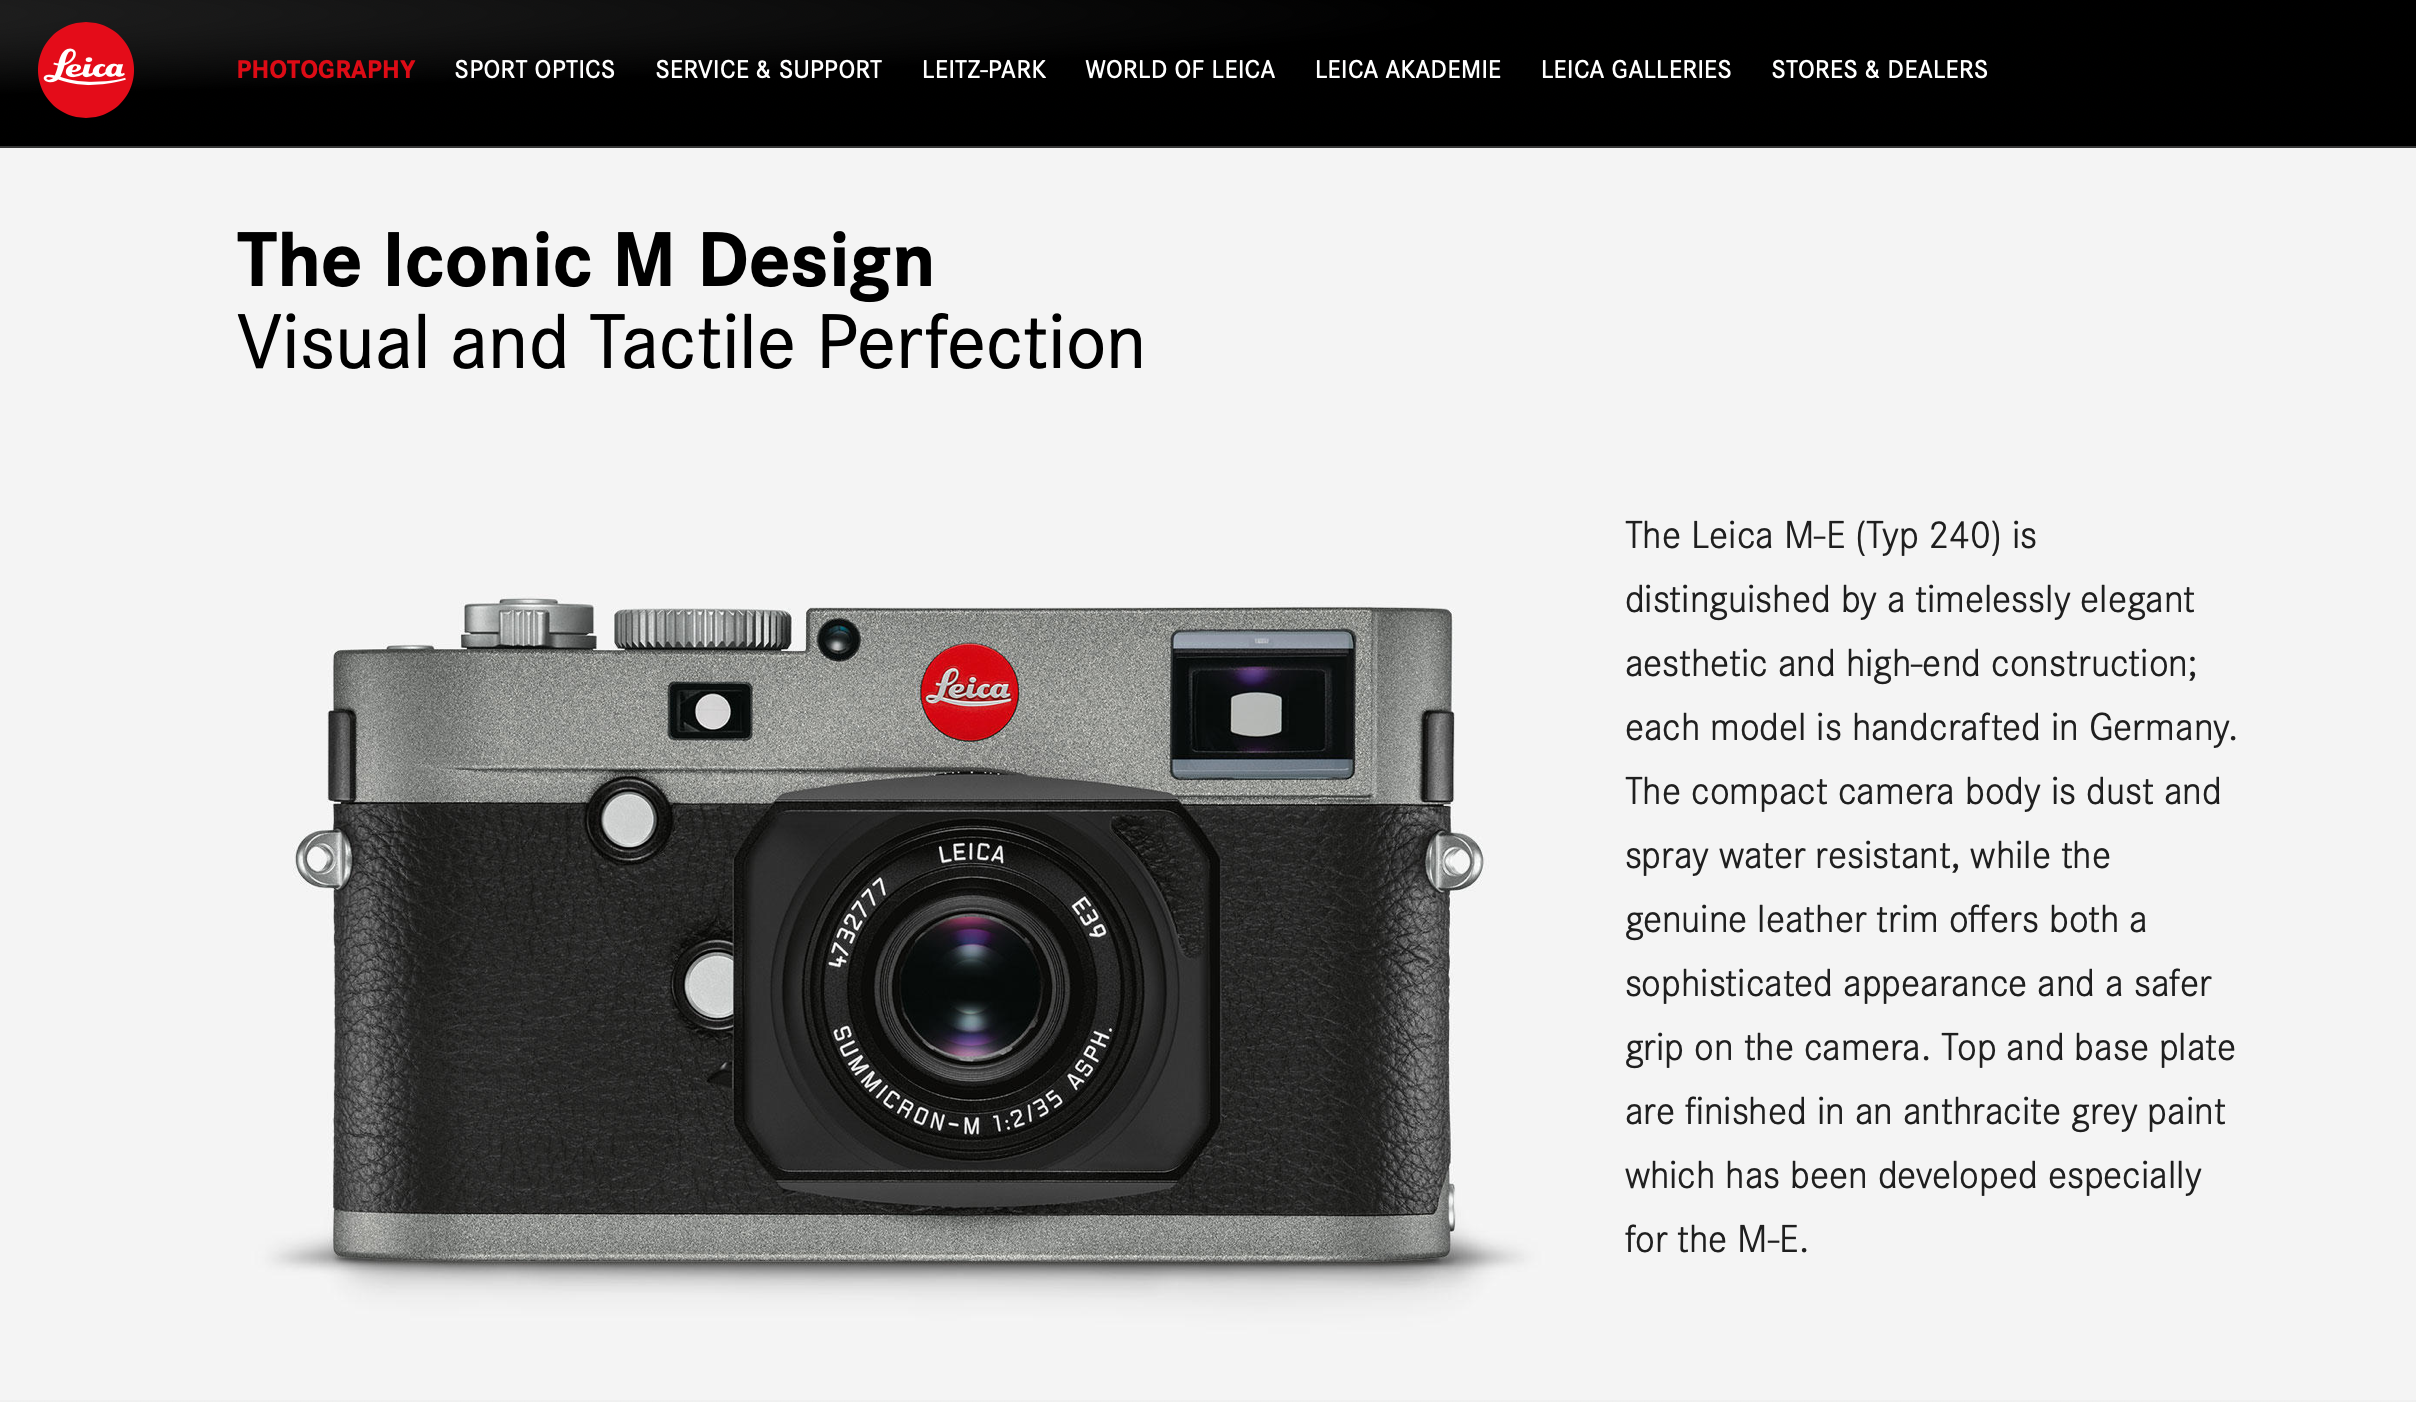 A new affordable Leica M